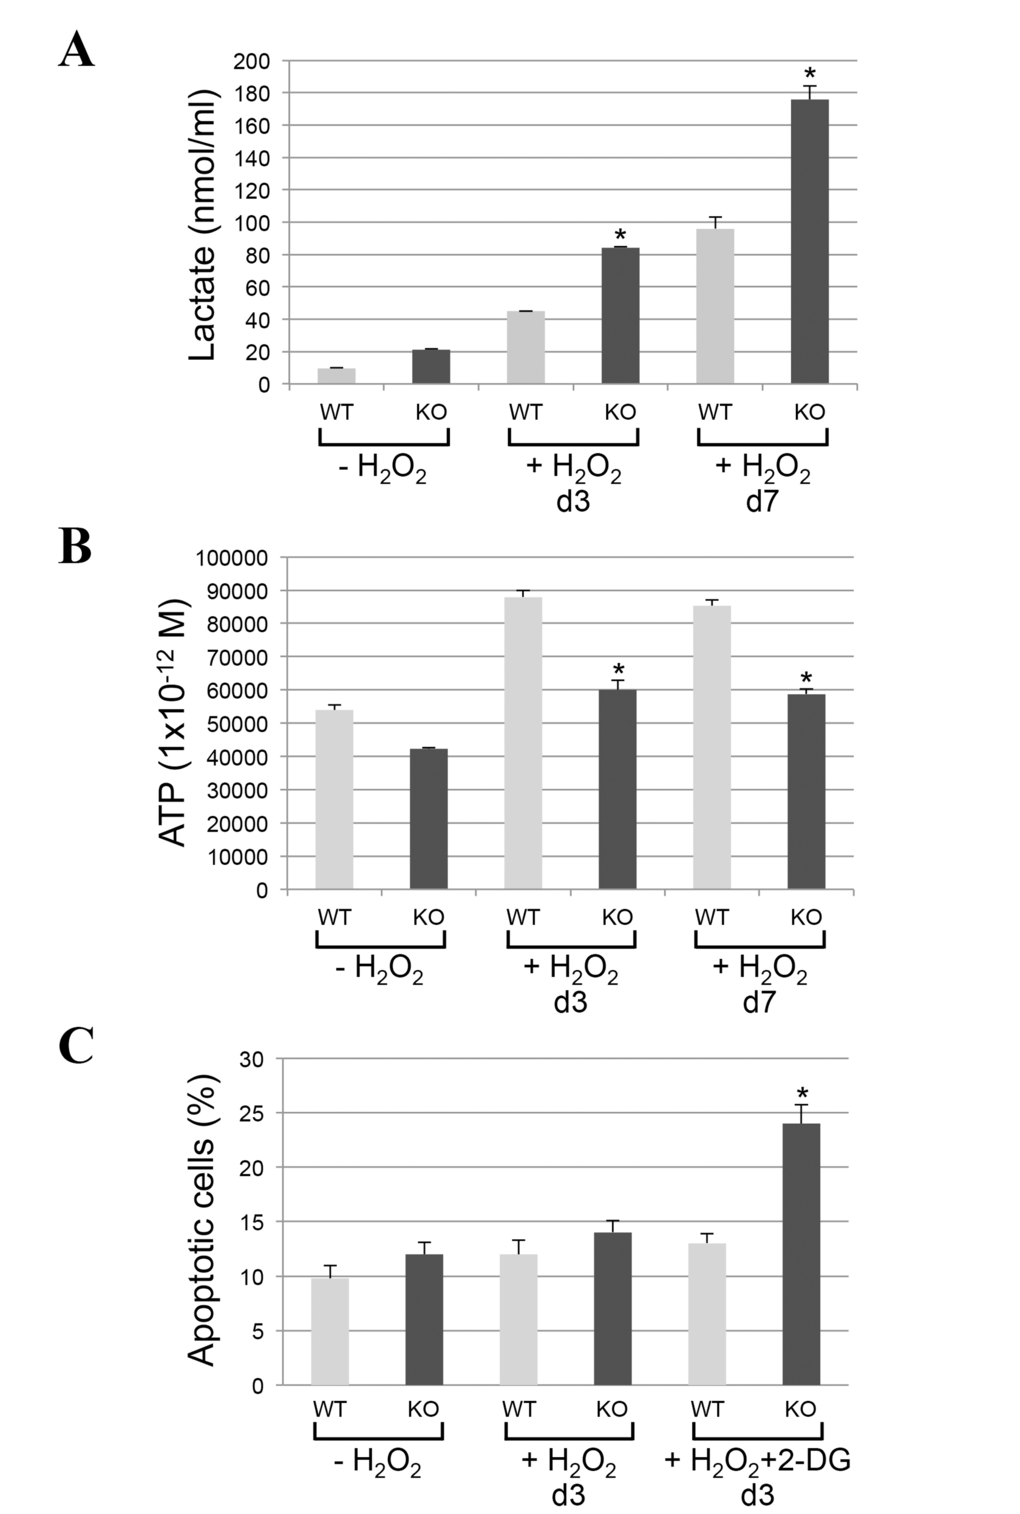 Lactate production is increased and ATP synthesis is inhibited in caveolin-1-lacking fibroblasts following oxidative stress. (A-B) Wild type and caveolin-1 null mouse embryonic fibroblasts (MEFs) were treated with sublethal doses of hydrogen peroxide (150 μM) for 2 hours. Cells were then recovered in complete medium for different periods of time (3 days and 7 days). Untreated cells (-H2O2) were used as control. (A) Lactate production was quantified using the Lactate Assay Kit from Sigma-Aldrich (MAK064). (B) ATP production was quantified using the Adenosine 5′-triphosphate (ATP) Bioluminescent Assay Kit from Sigma-Aldrich (FL-AA). Values were normalized to cell number. (C) Wild type and caveolin-1 null mouse embryonic fibroblasts (MEFs) were treated with sublethal doses of hydrogen peroxide (150 μM) for 2 hours in the presence or absence of 2-deoxy-D-glucose (2-DG; 5mM). Cells were recovered in complete medium for 3 days in the presence or absence of 2-DG. Untreated cells (-H2O2) were used as control. Cells were stained with DAPI and the number of cells showing nuclear condensation was quantified. Values in (A-C) represent mean ± SEM; *P